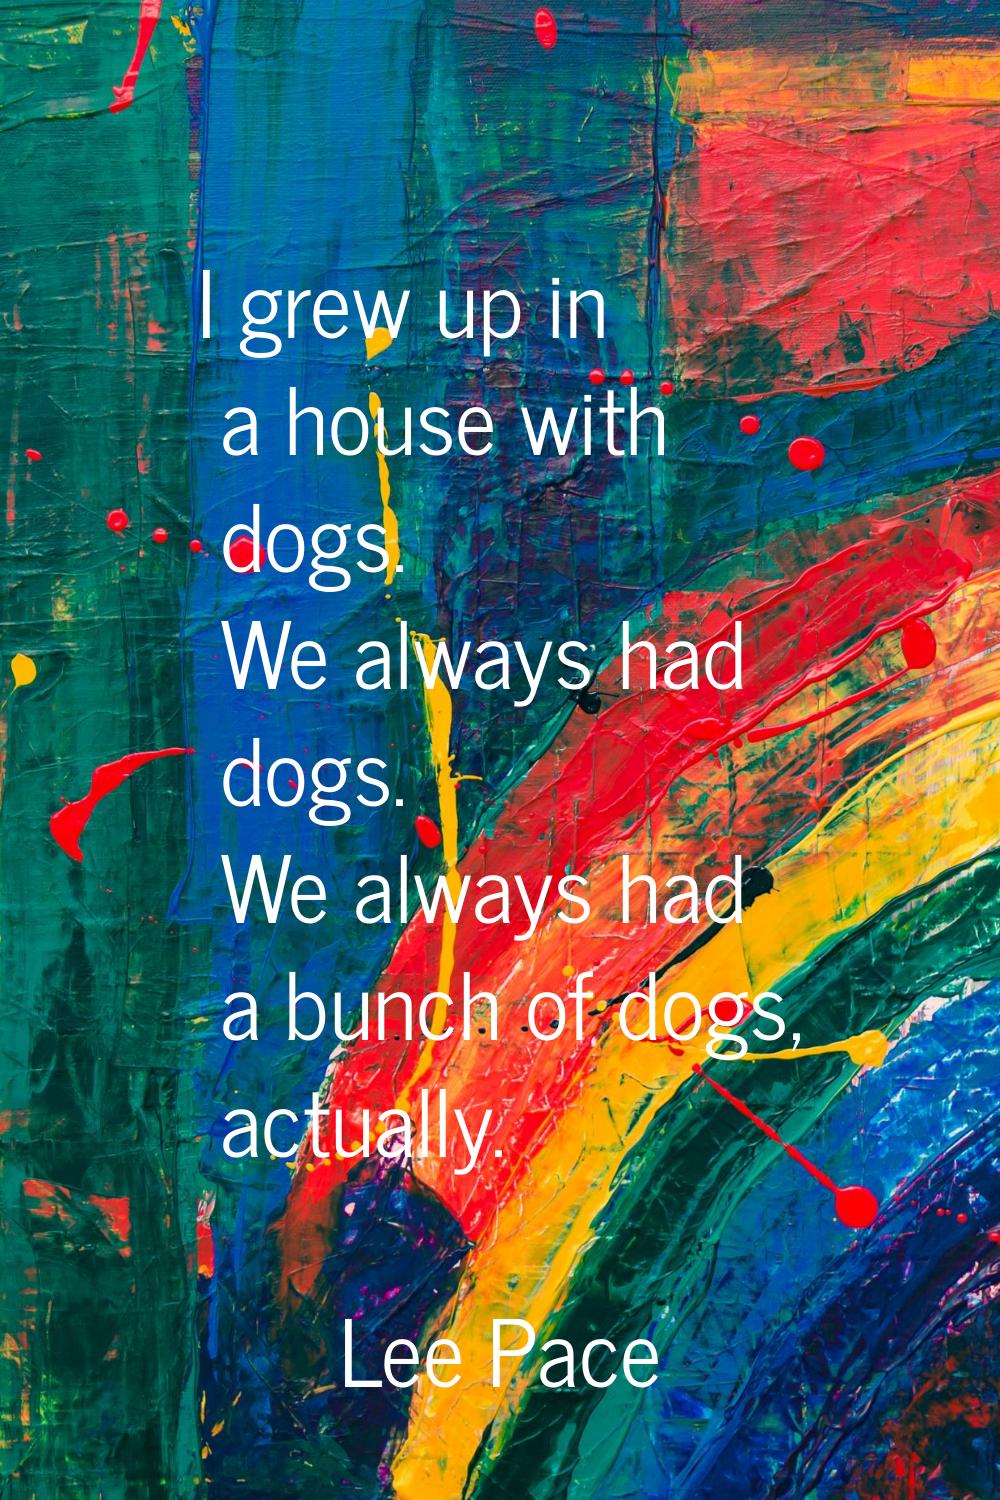 I grew up in a house with dogs. We always had dogs. We always had a bunch of dogs, actually.